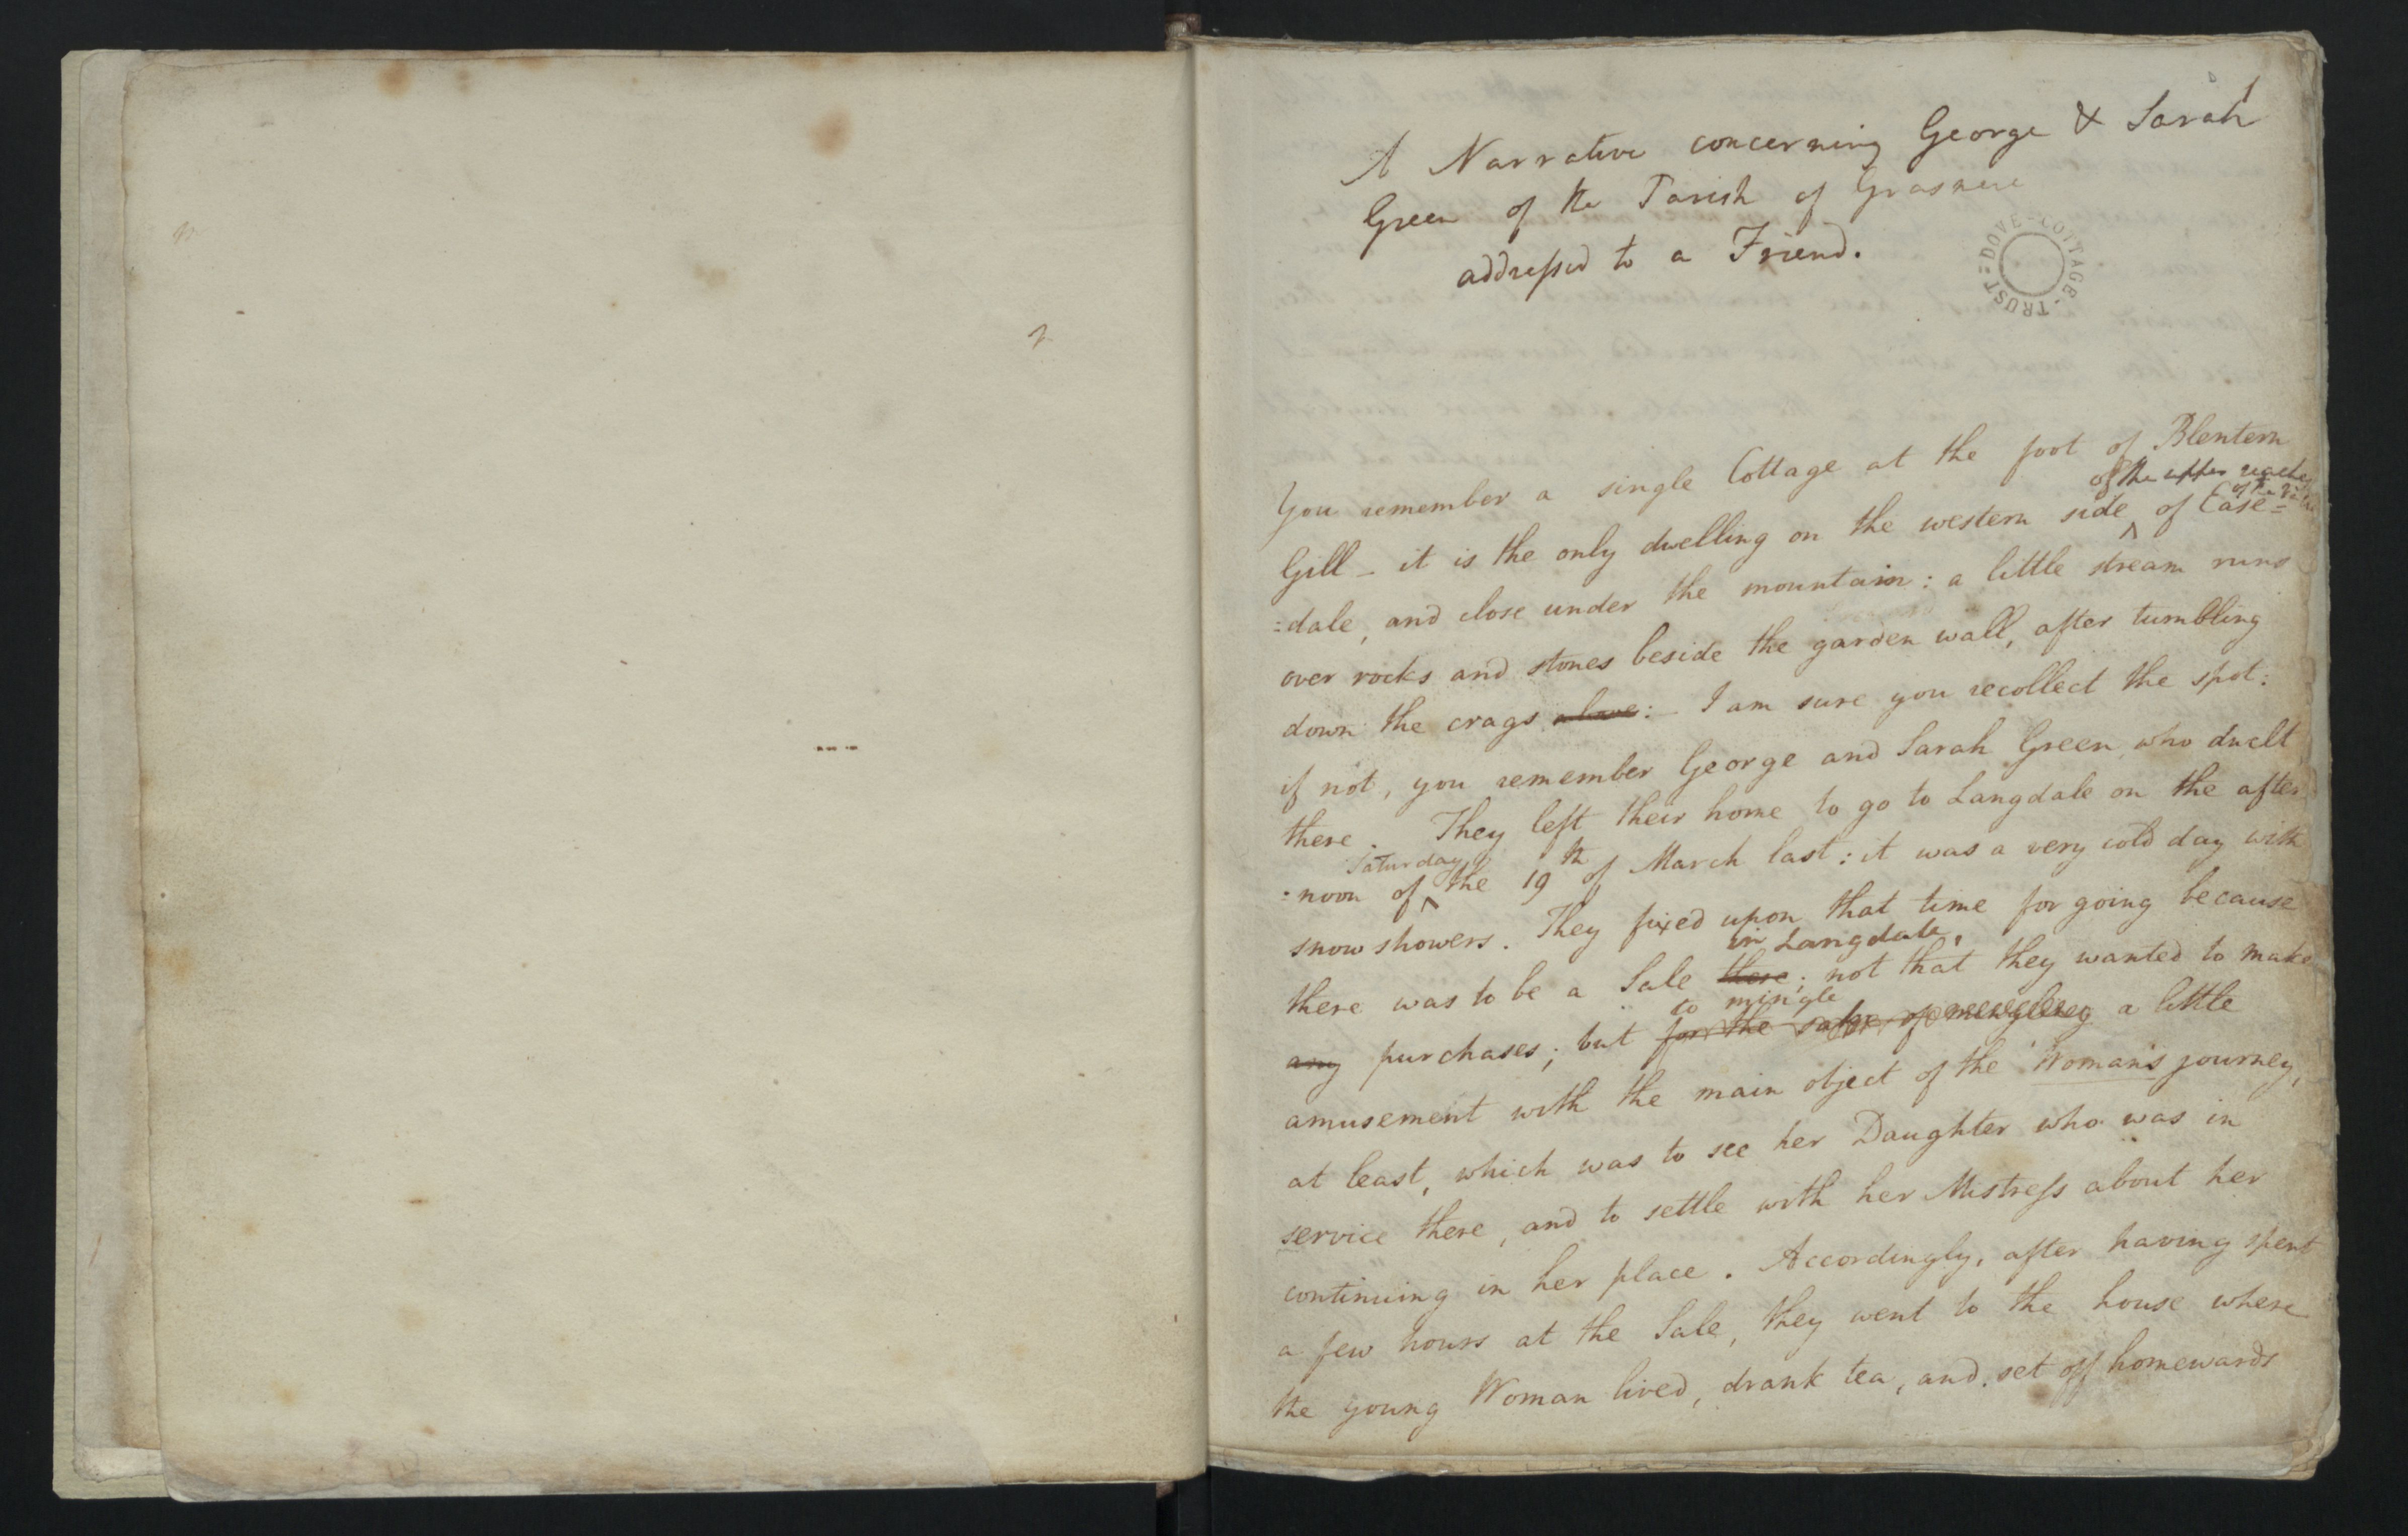 First page of Dorothy’s A Narrative concerning George & Sarah Green of the Parish of Grasmere addressed to a Friend